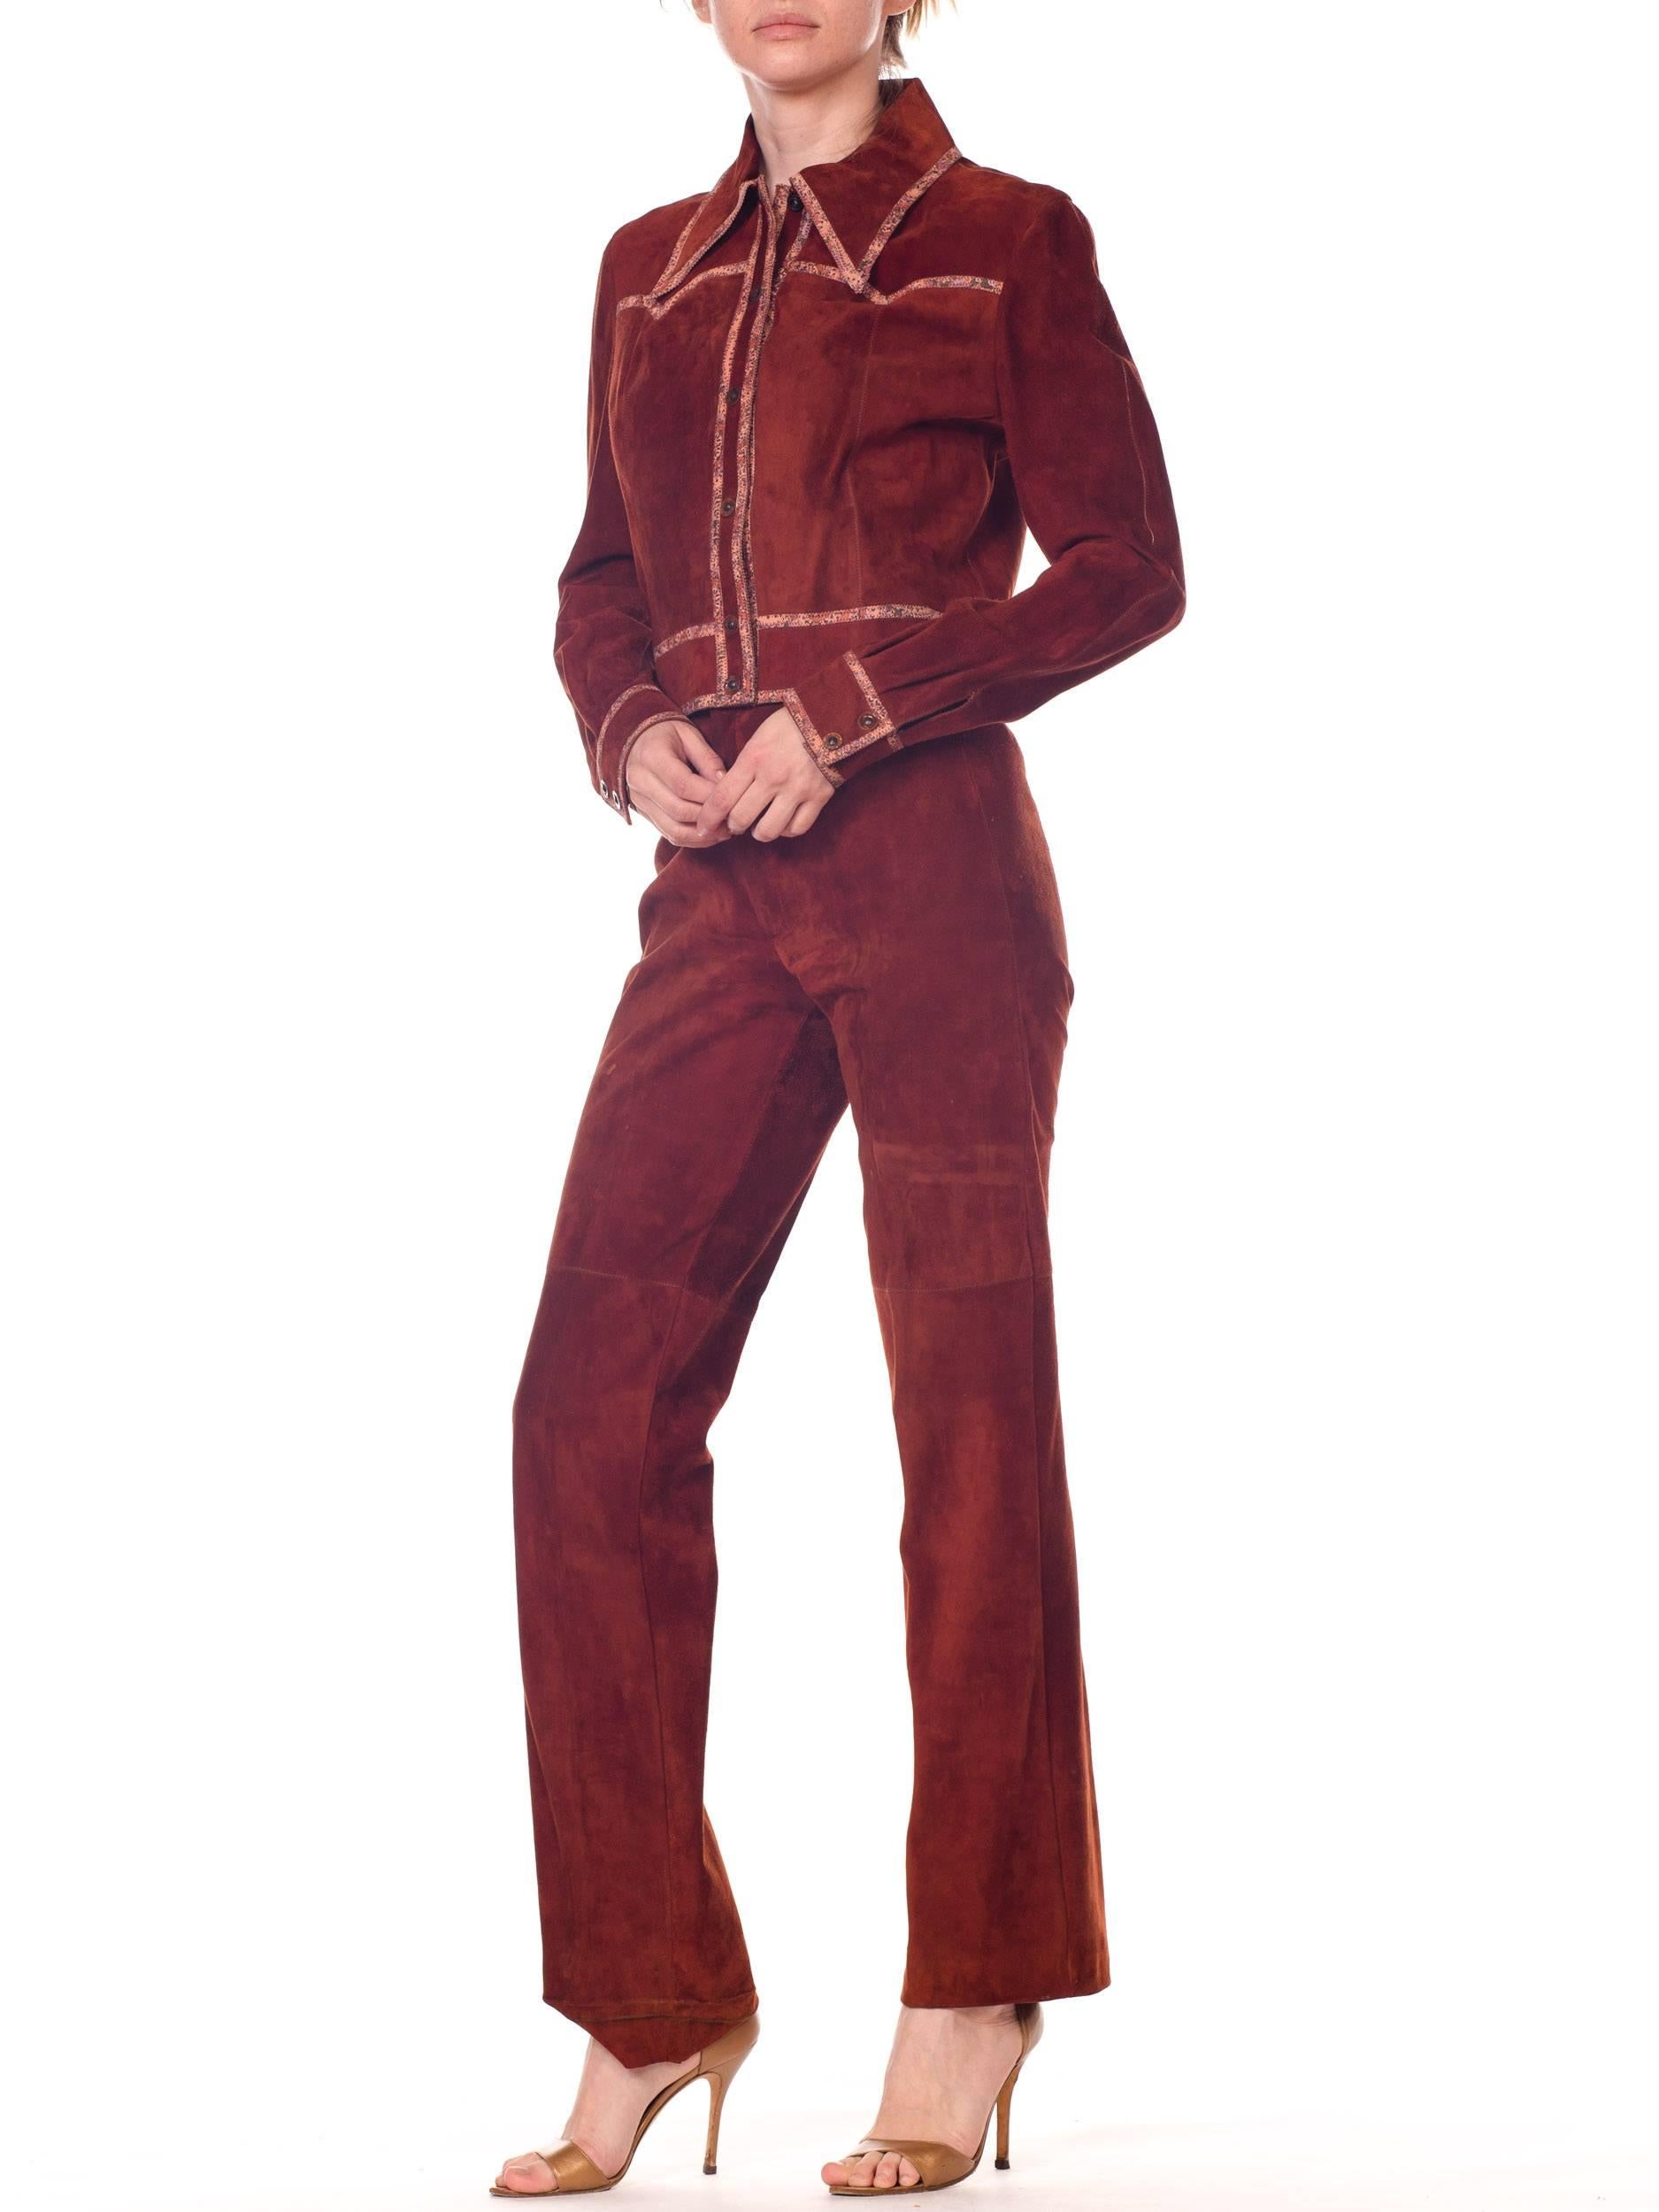 Women's Roberto Cavalli Cognac Suede Pants and Jacket set with printed trims